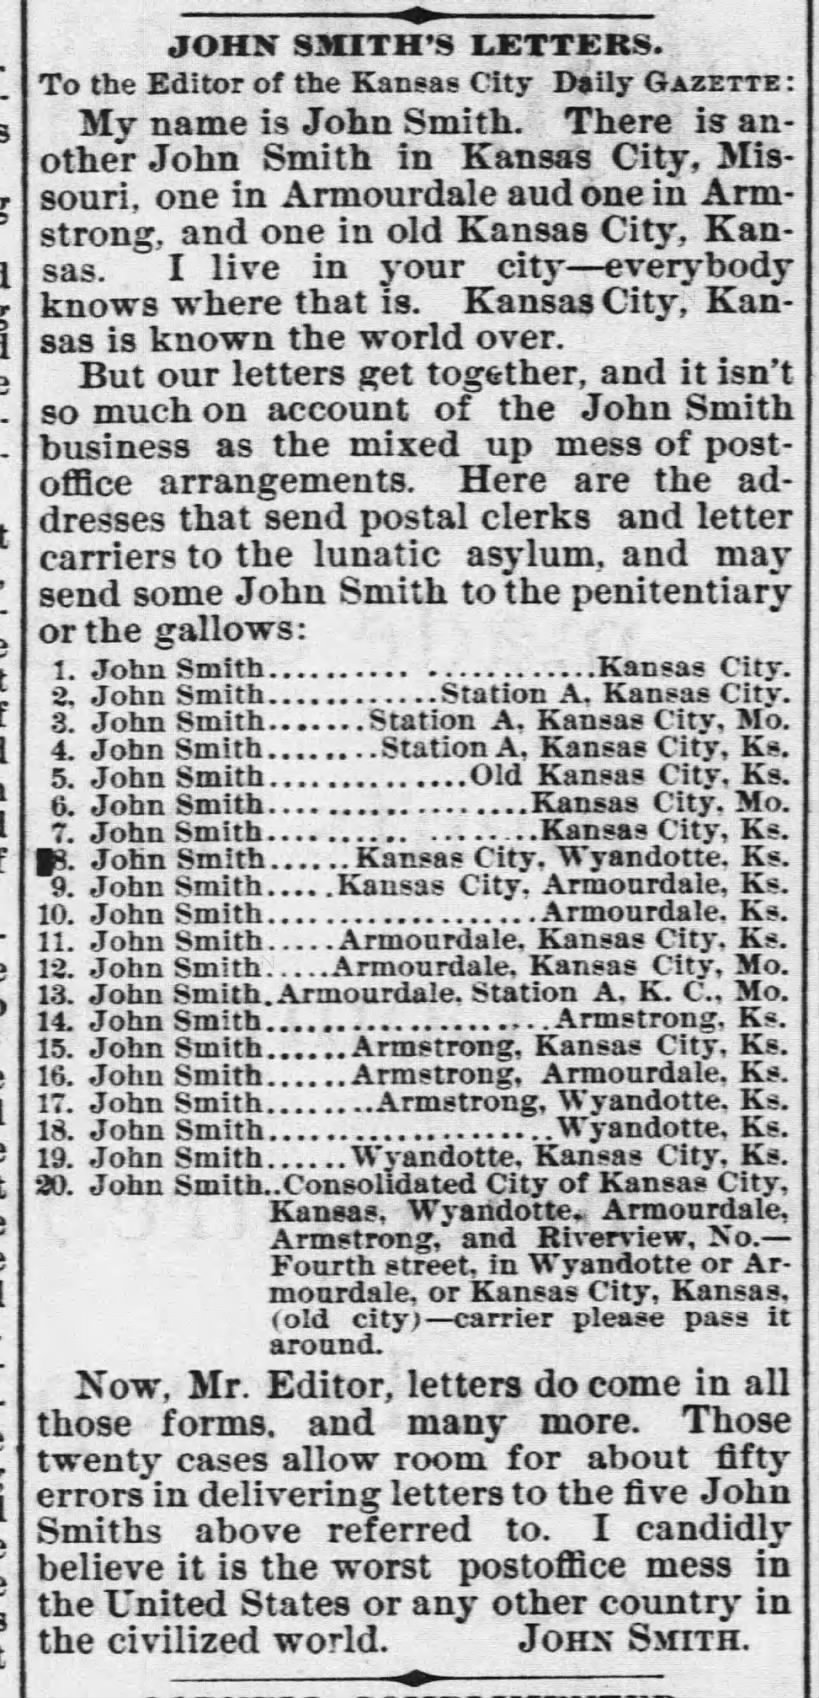 "John Smith" causes post office mix-ups (1888)